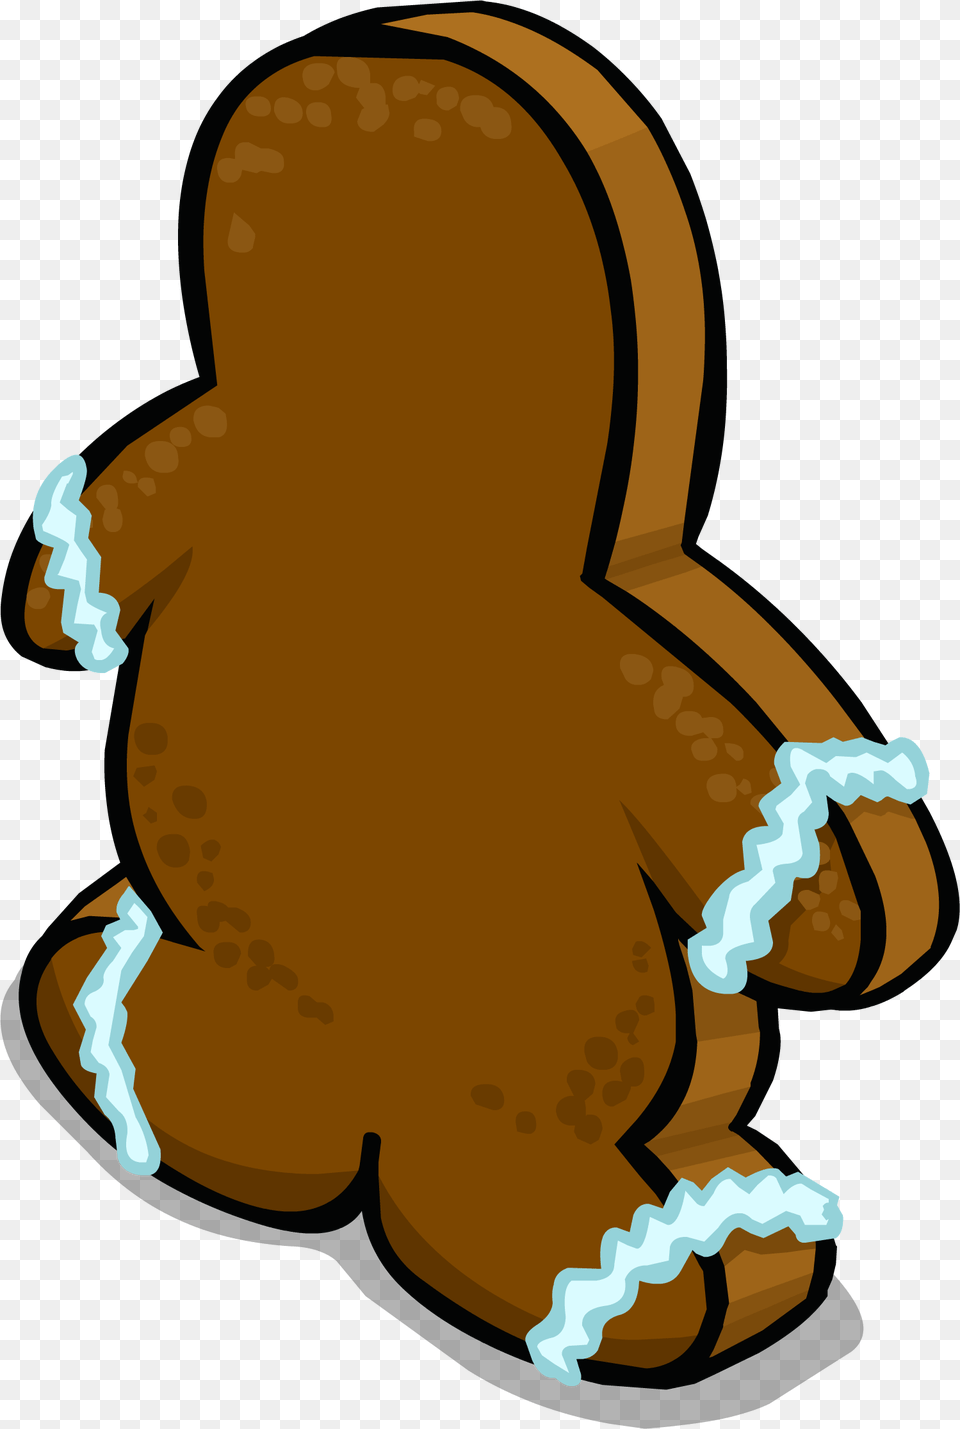 Gingerbread Man Sprite 004 Gingerbread Man, Food, Sweets, Cookie, Astronomy Png